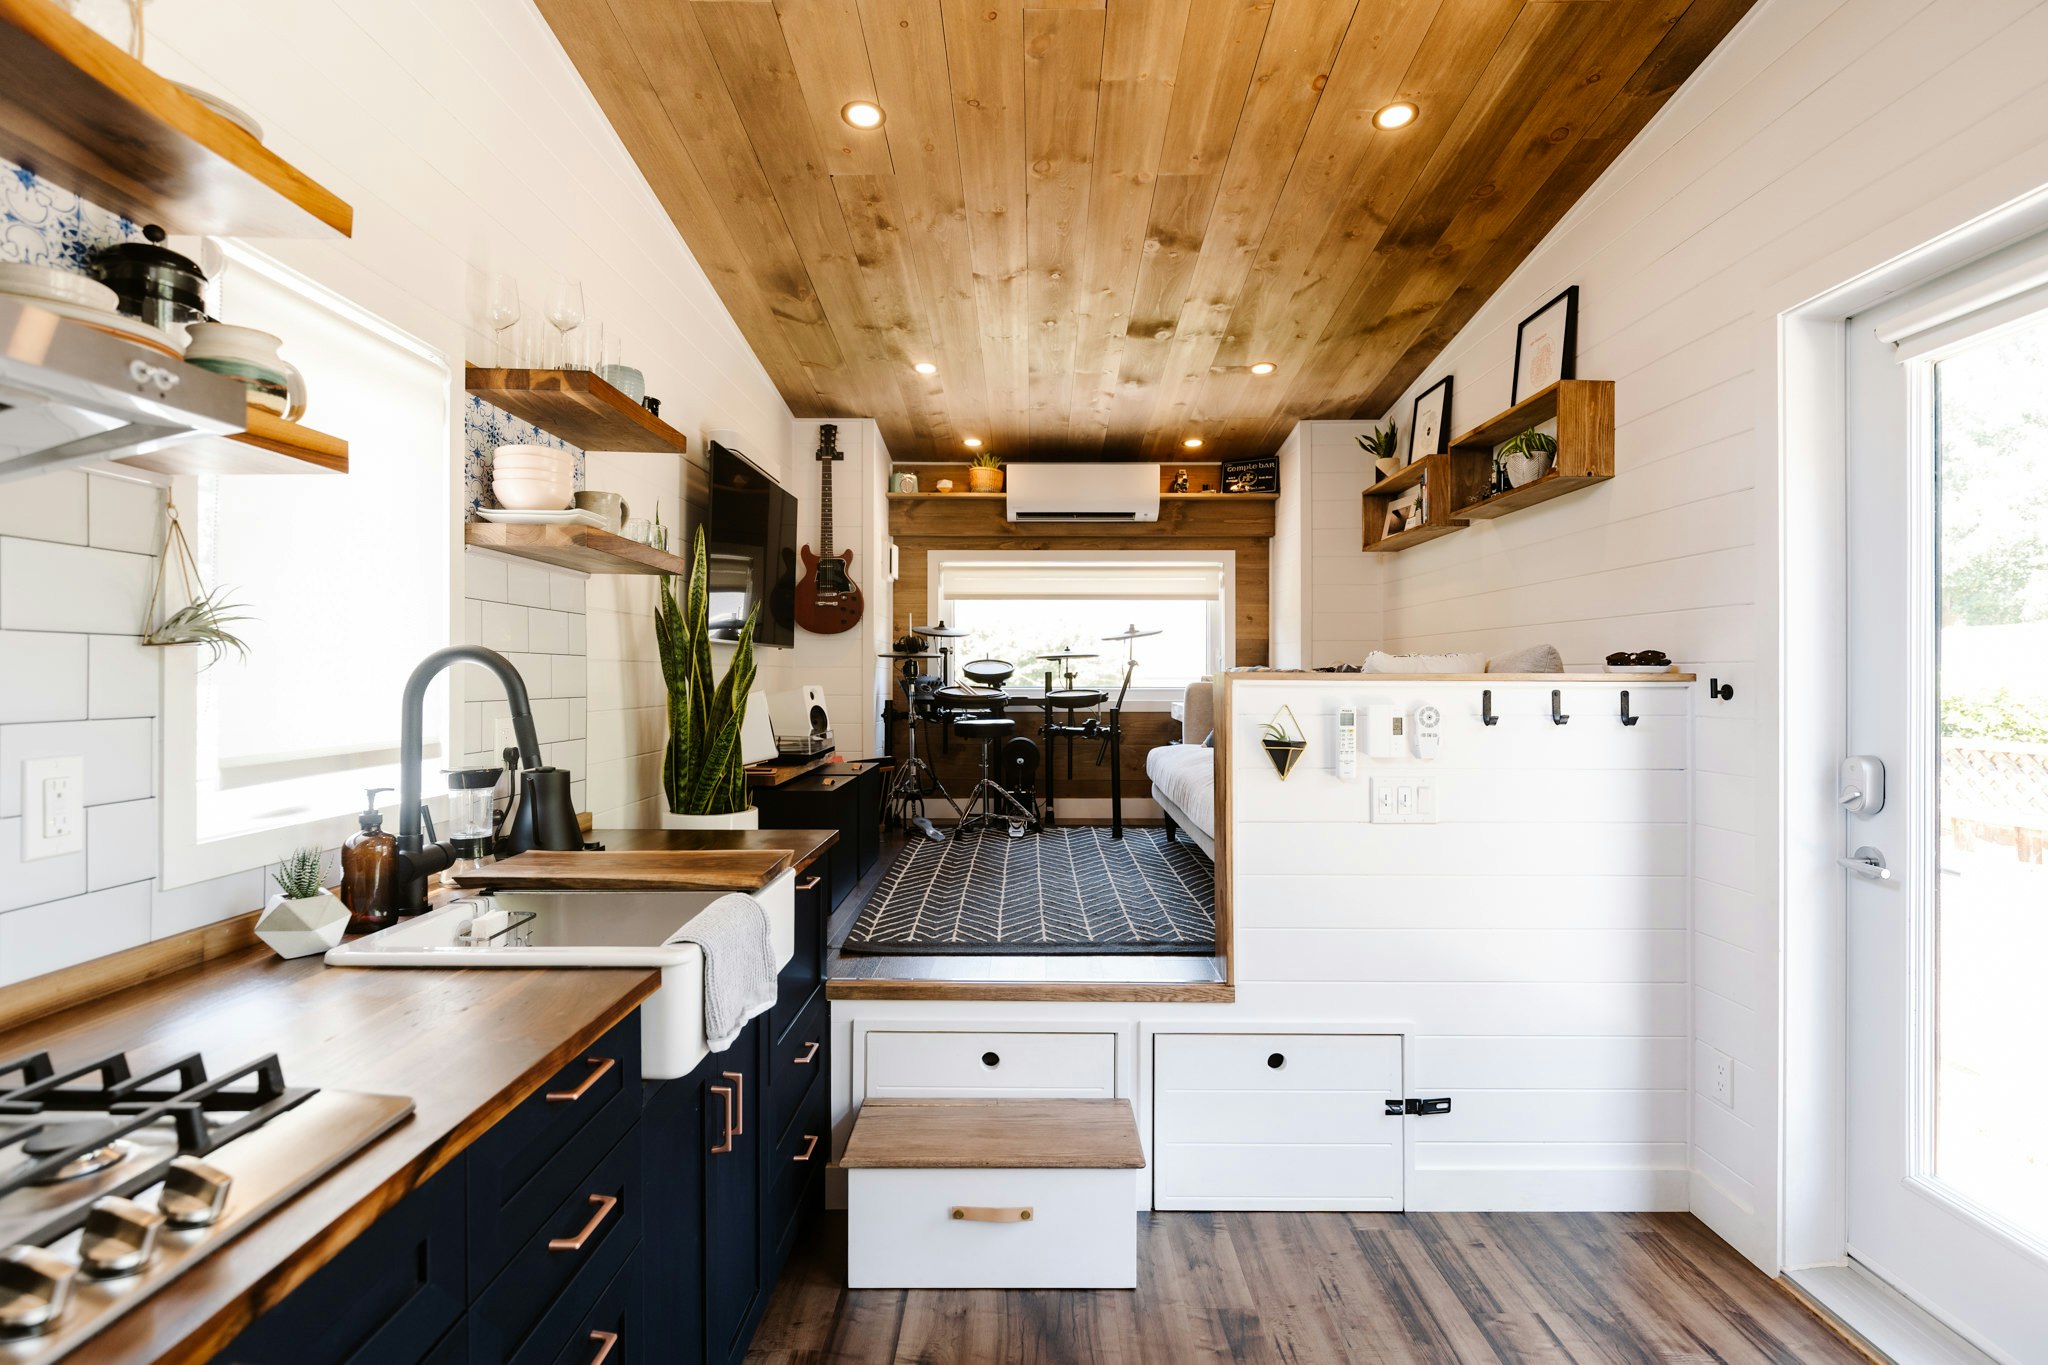 Loving the idea of tiny house living, even if you don't live in one